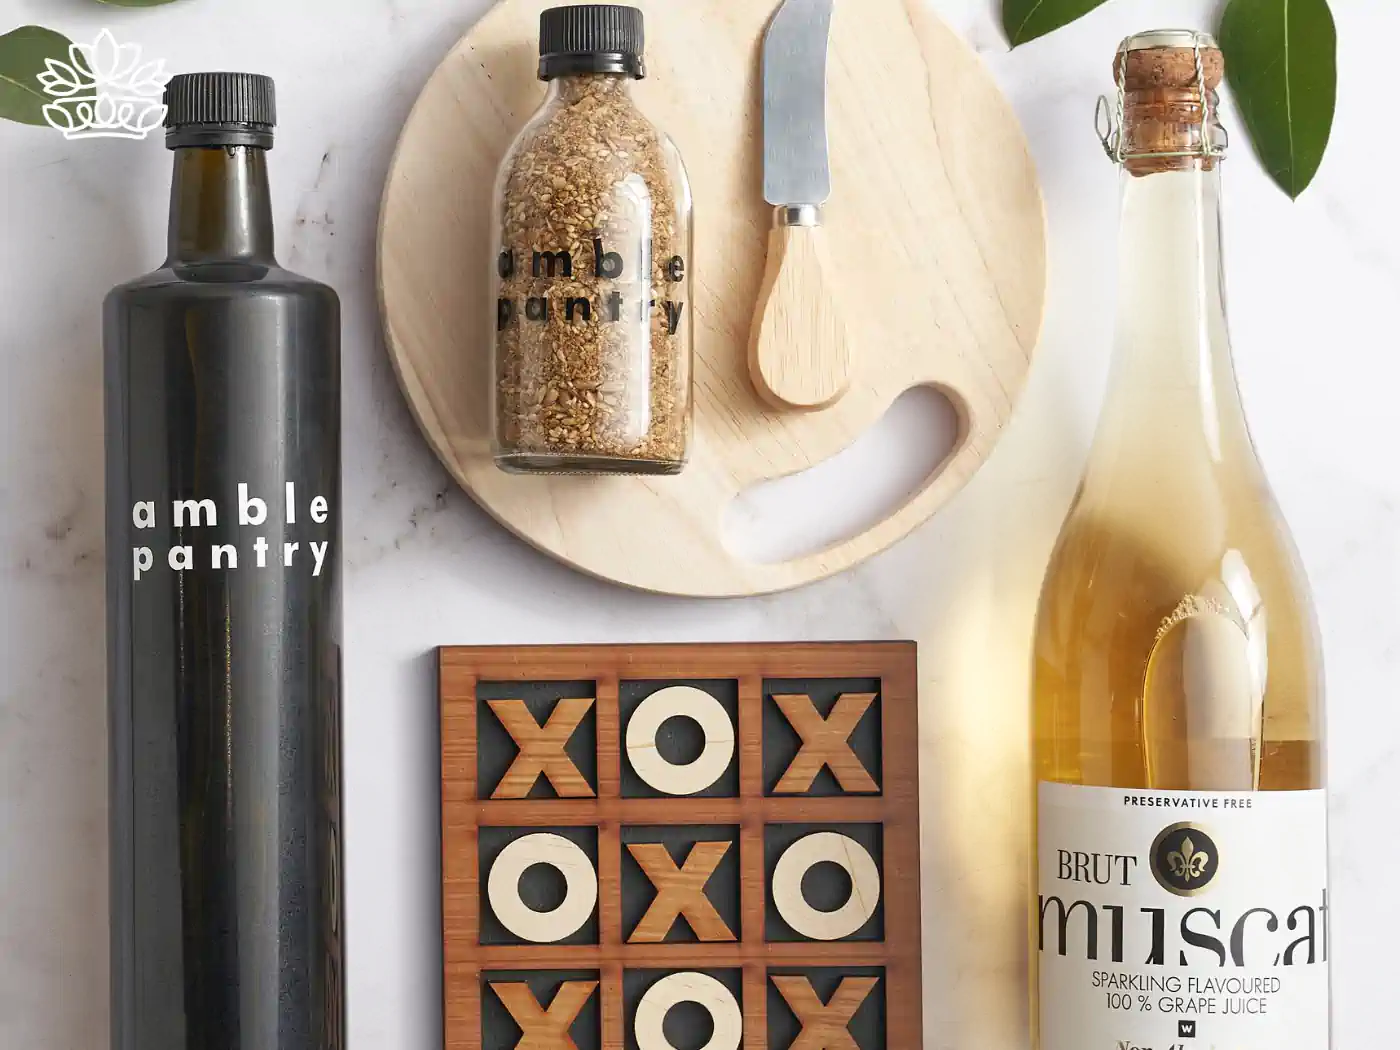 A carefully curated gift set featuring pantry items like olive oil and spices, a bottle of grape juice, a wooden cheese board, a knife, and a tic-tac-toe game, arranged beautifully on a marble surface. Fabulous Flowers and Gifts